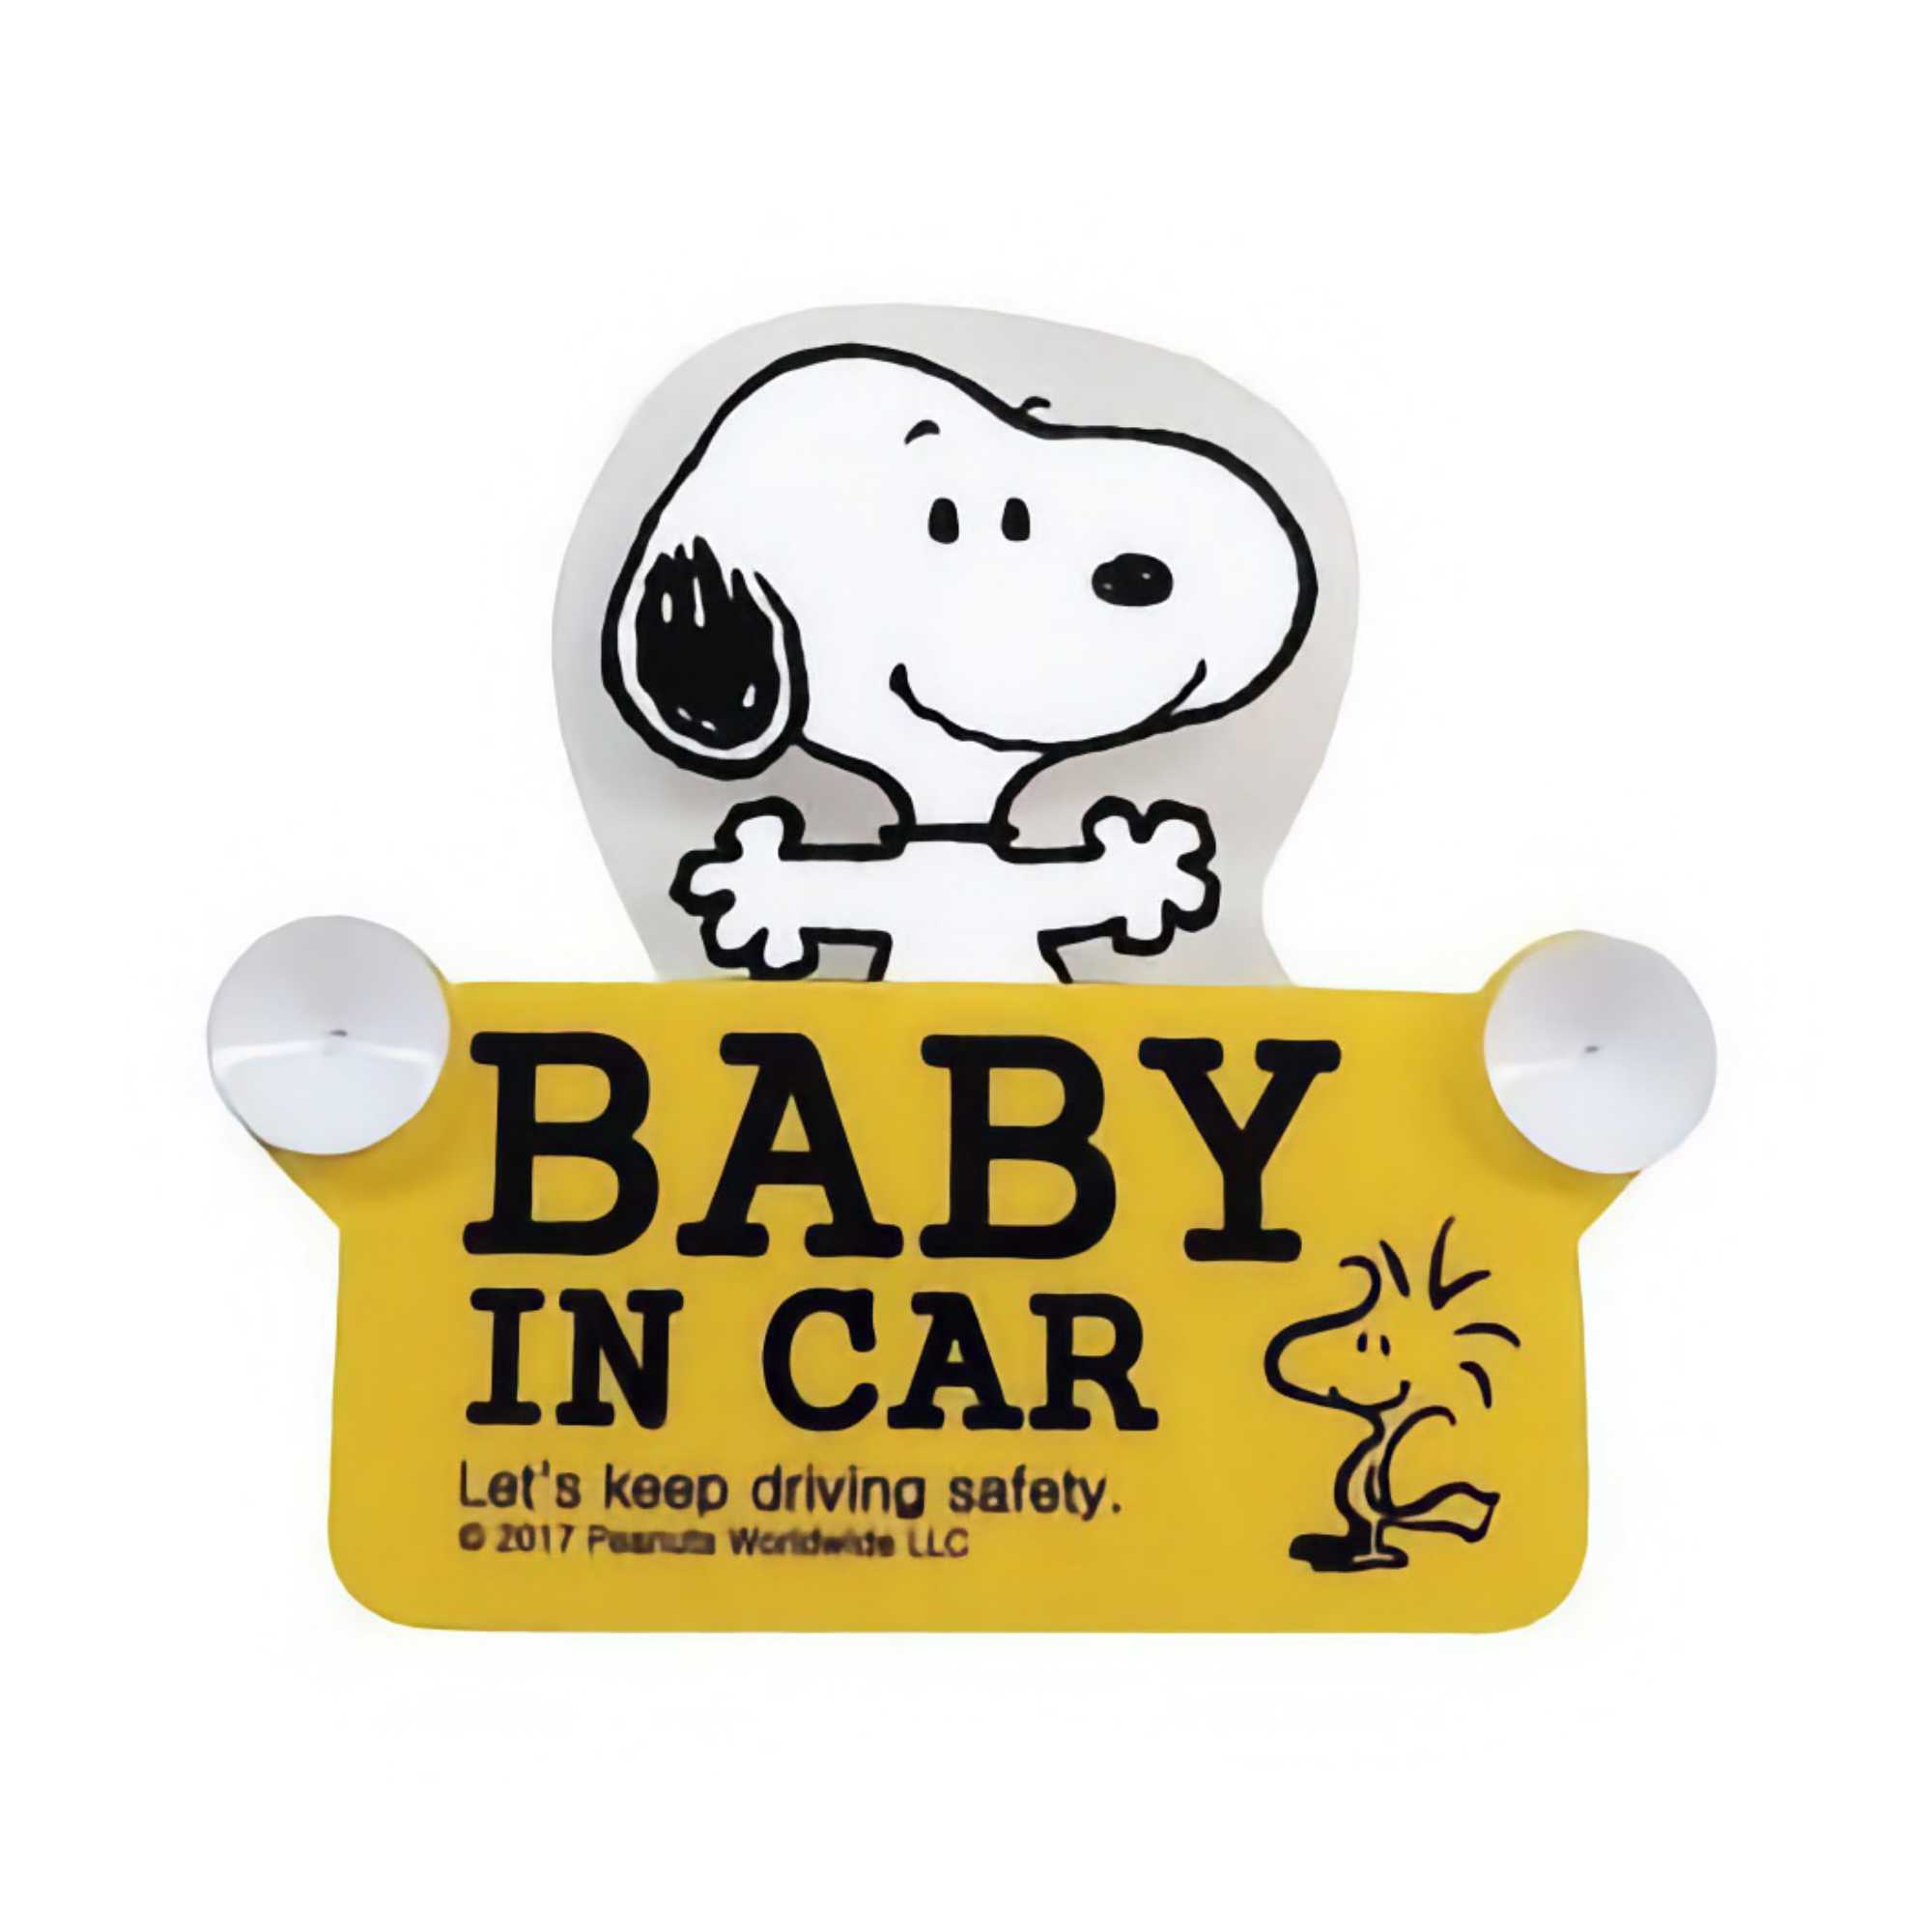 Peanuts Snoopy Wobble Car Safety Sign